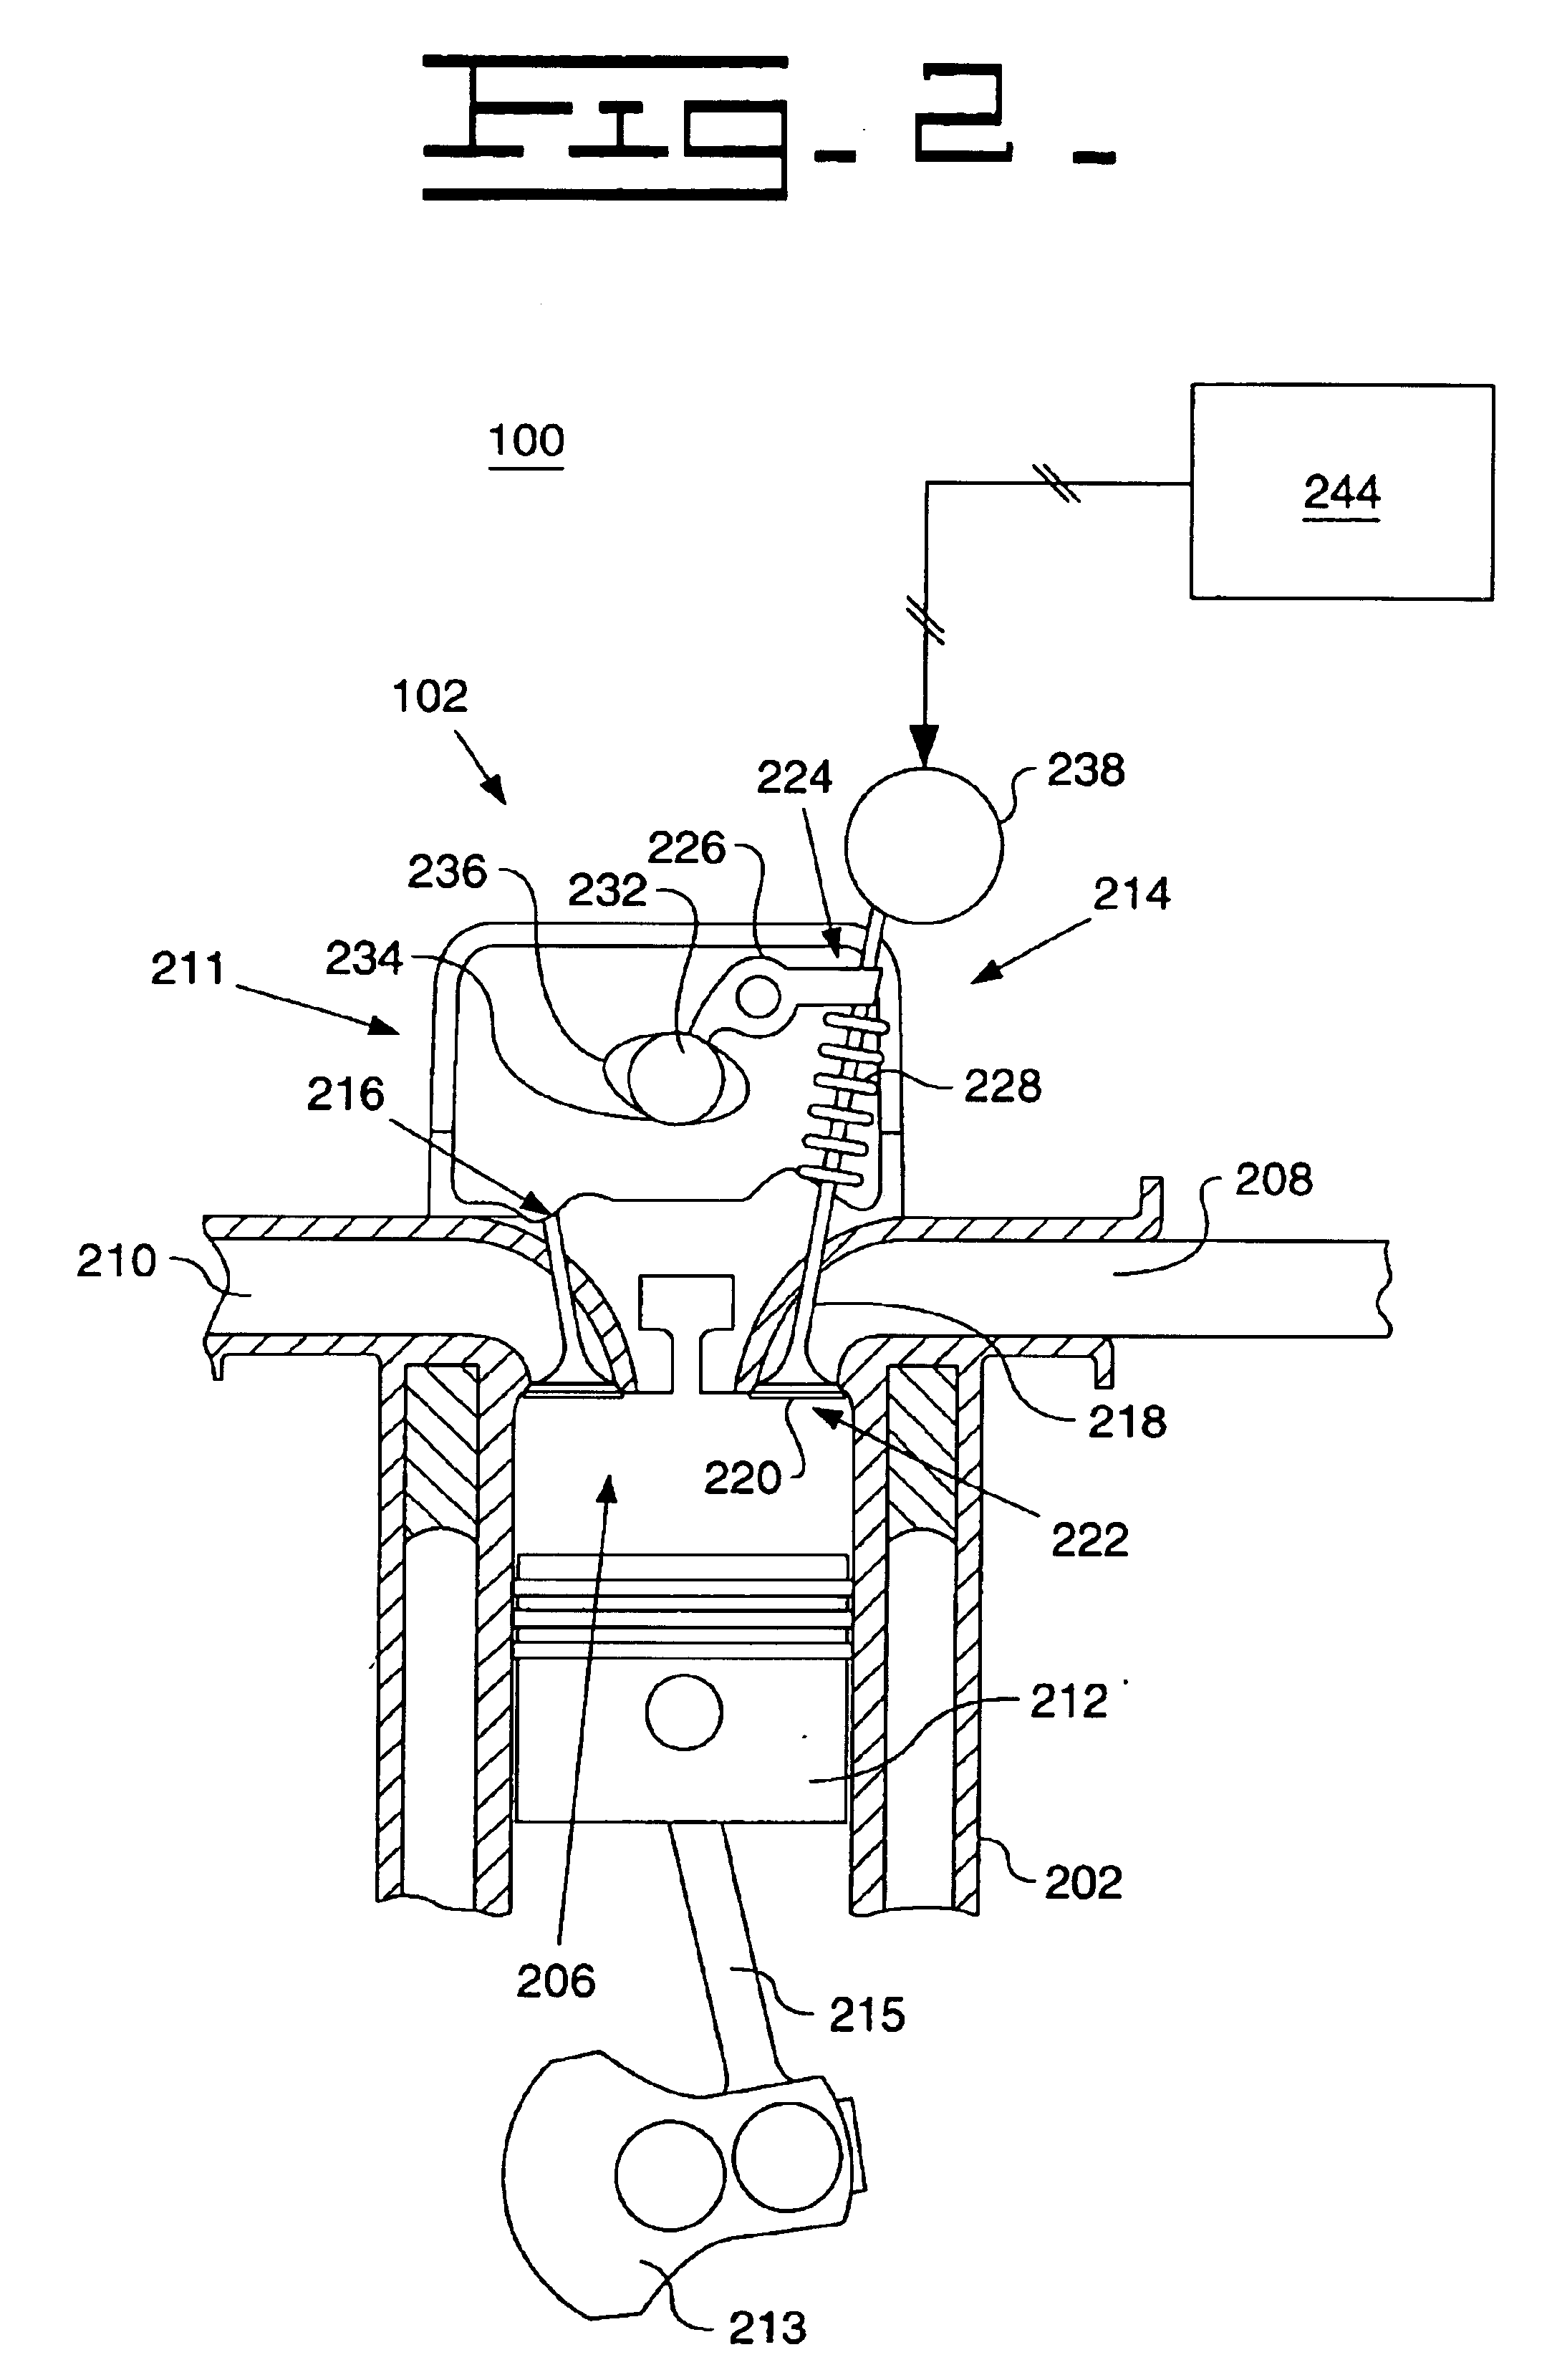 Method and apparatus for PM filter regeneration